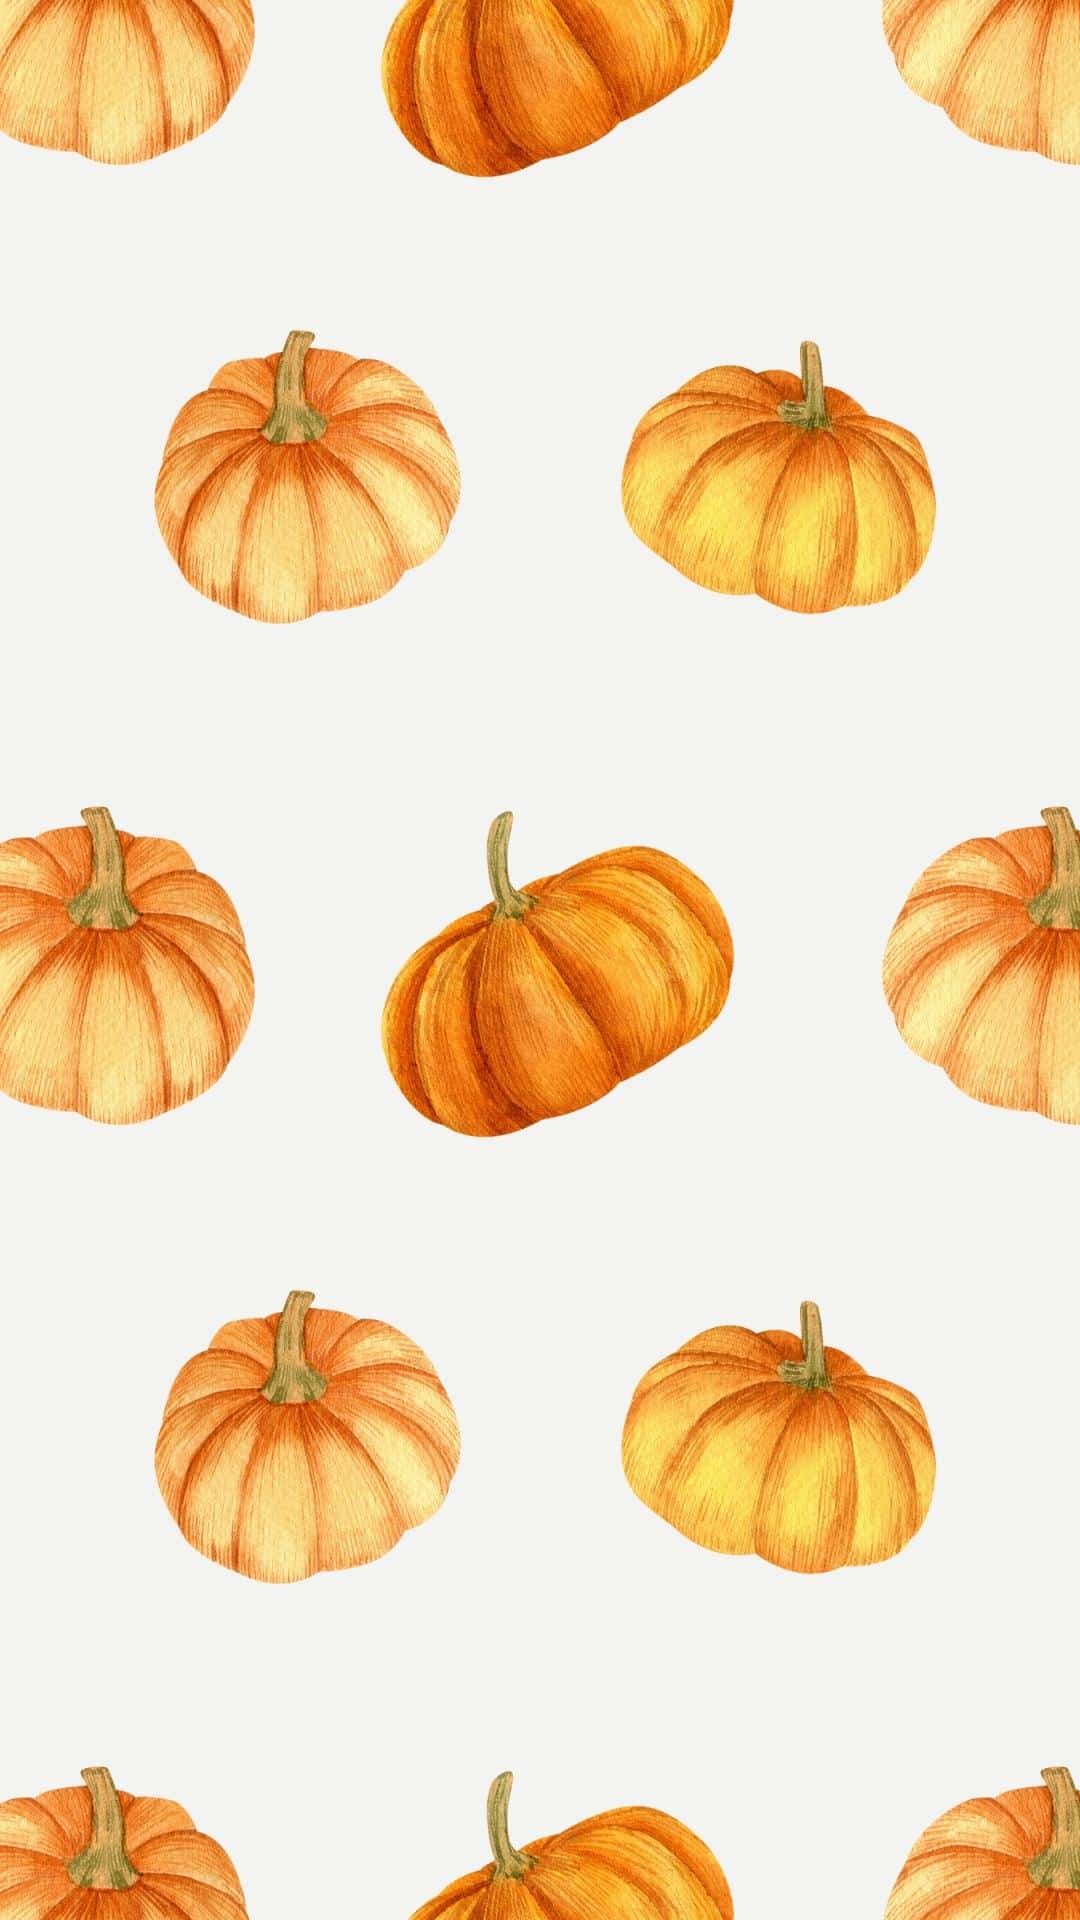 Orange pumpkins on a white background to be used as a fall phone background.